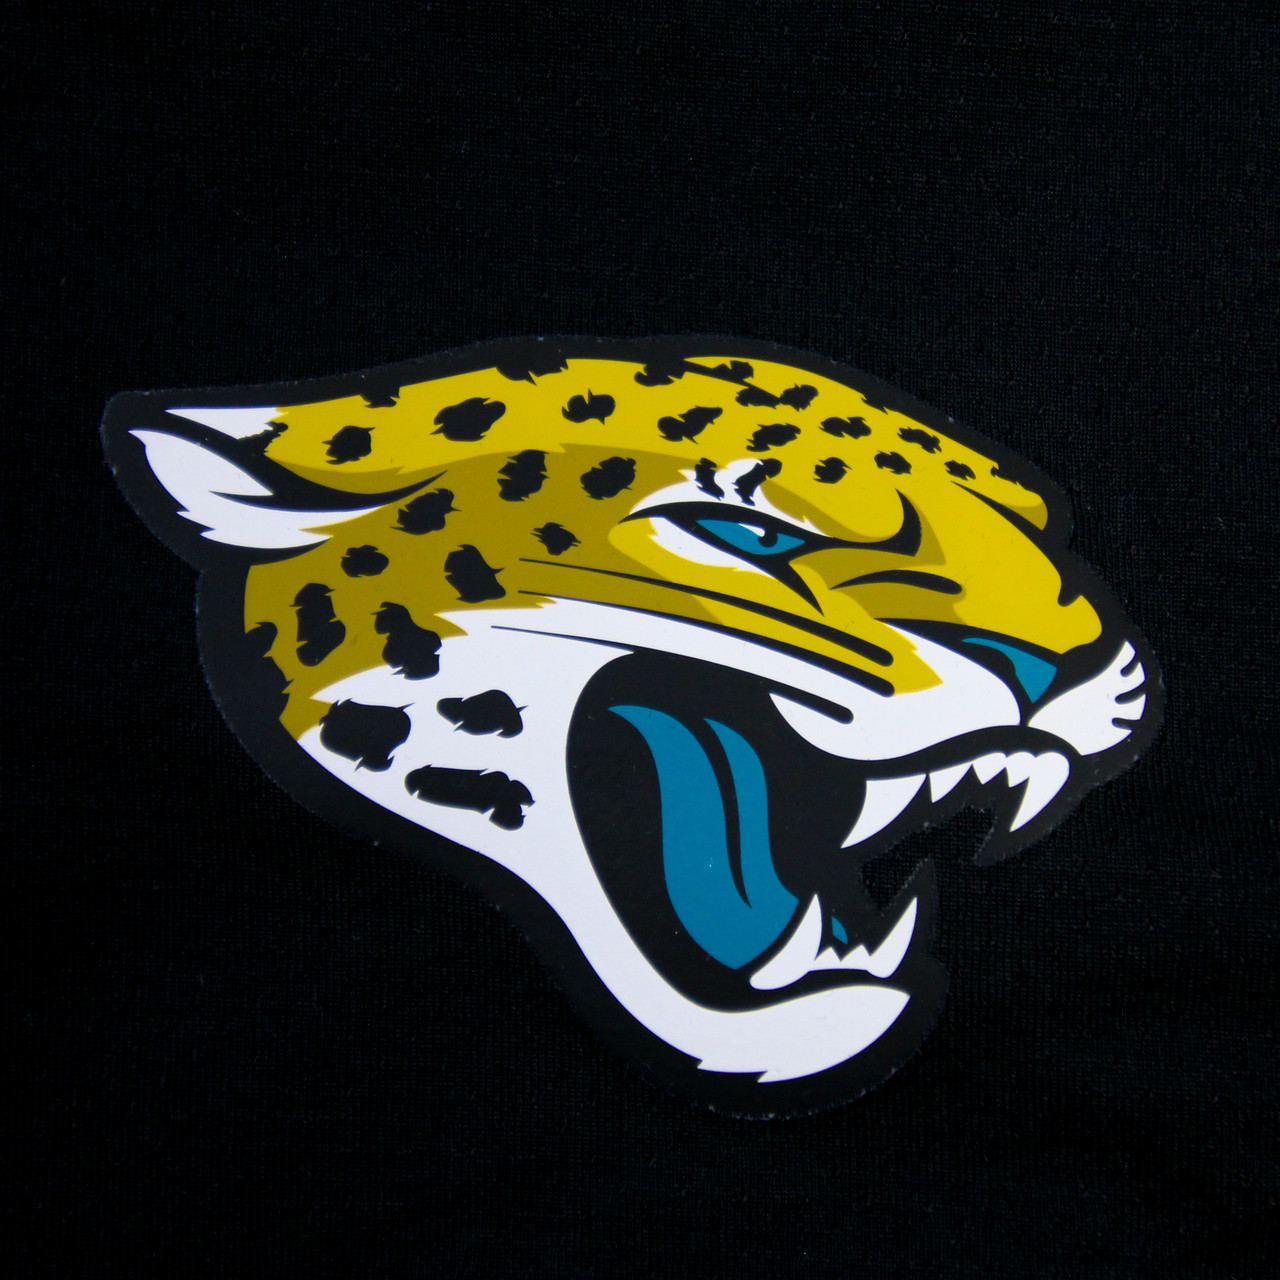 Jacksonville Jaguars Apparel | Clothing and Gear for Jacksonville ...